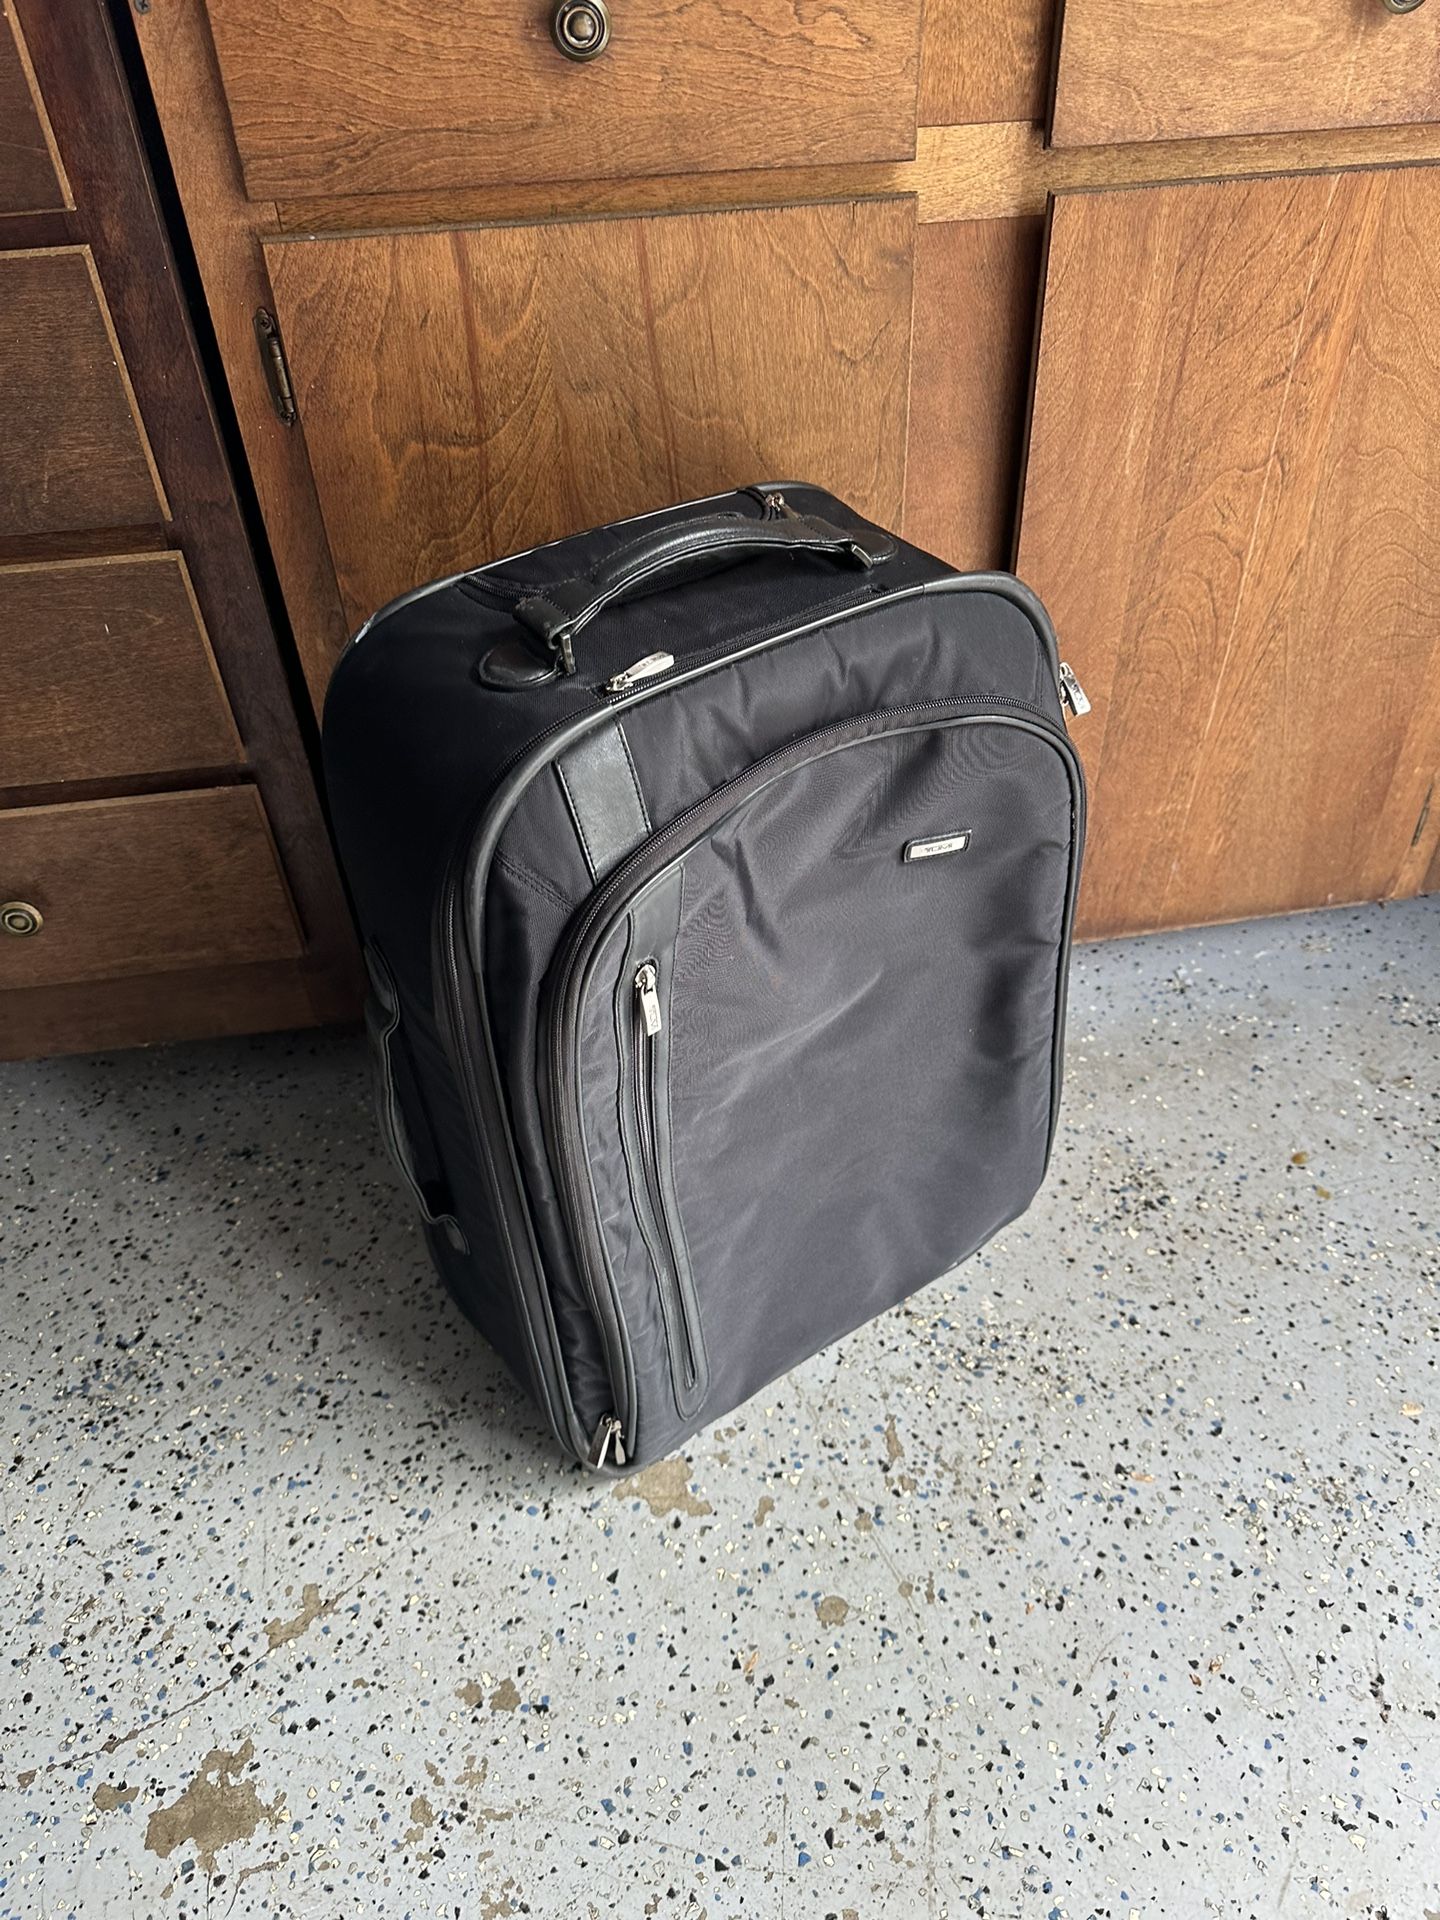 Medium luggage in great condition domination is on the picture  